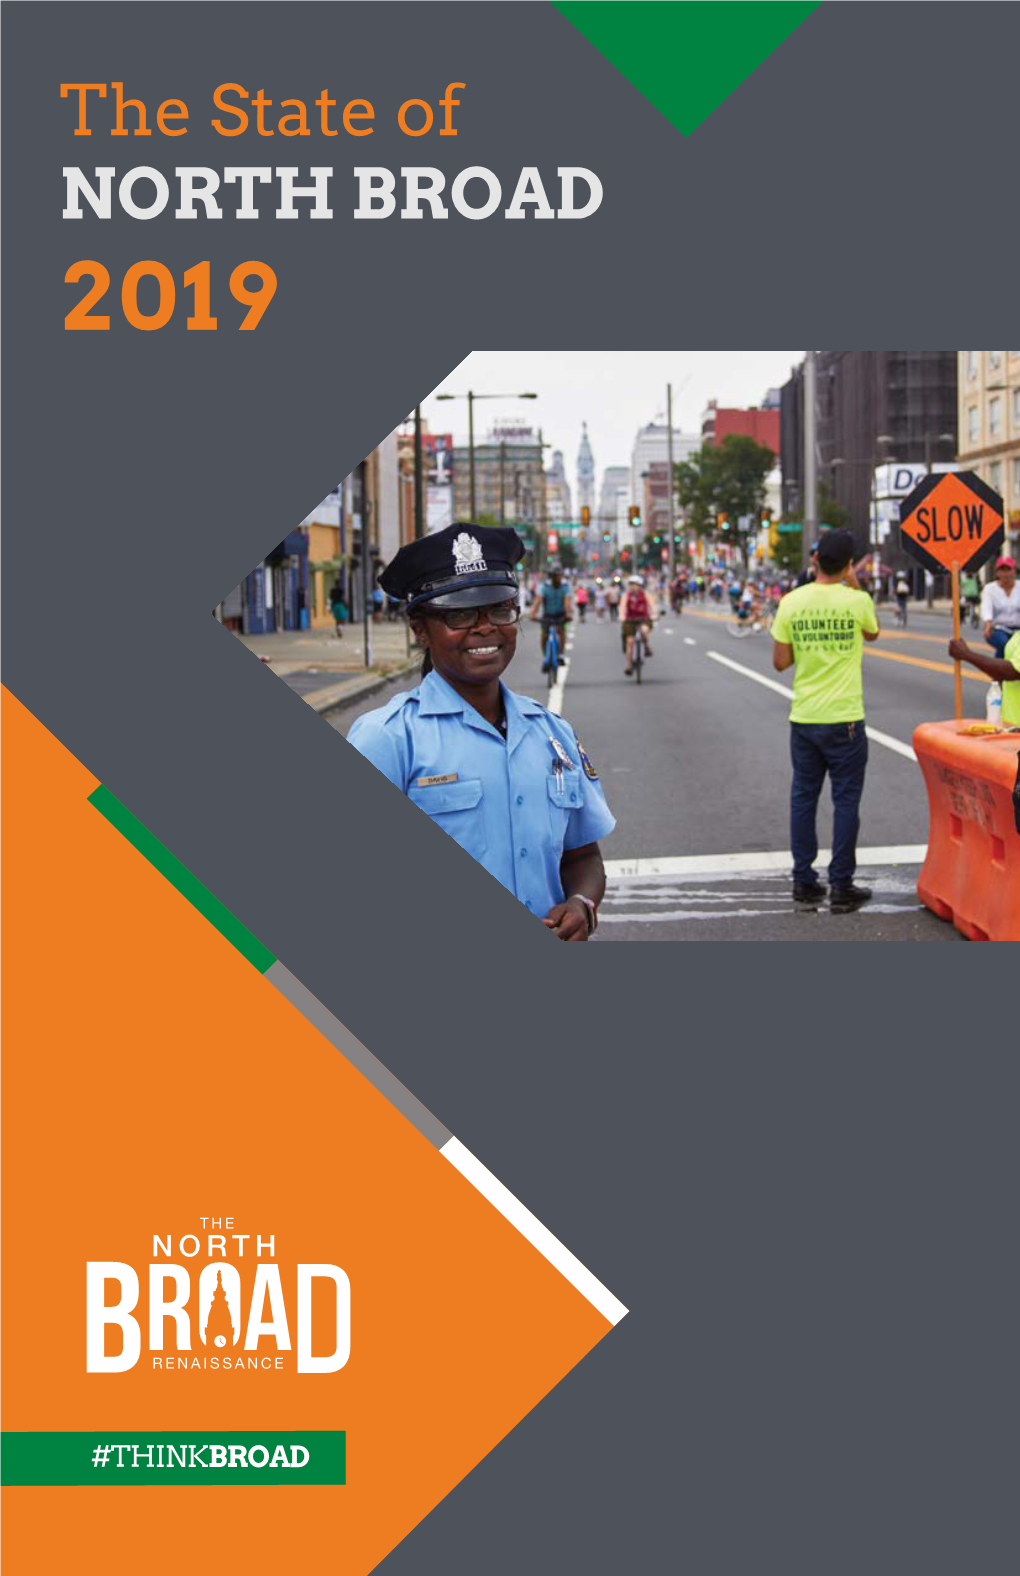 The State of NORTH BROAD 2019